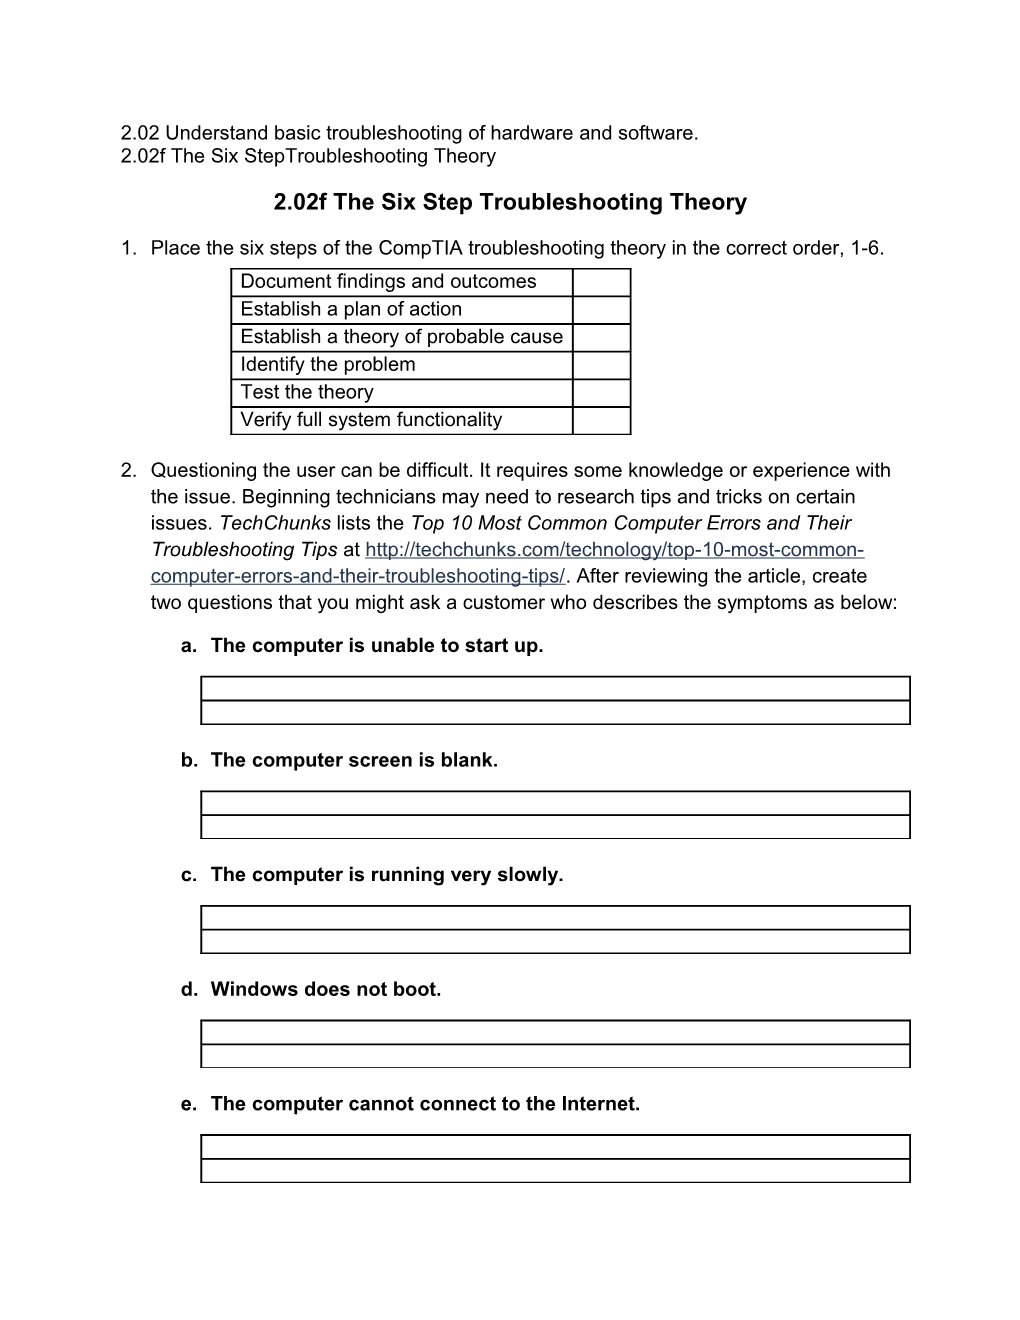 2.02F the Six Step Troubleshooting Theory